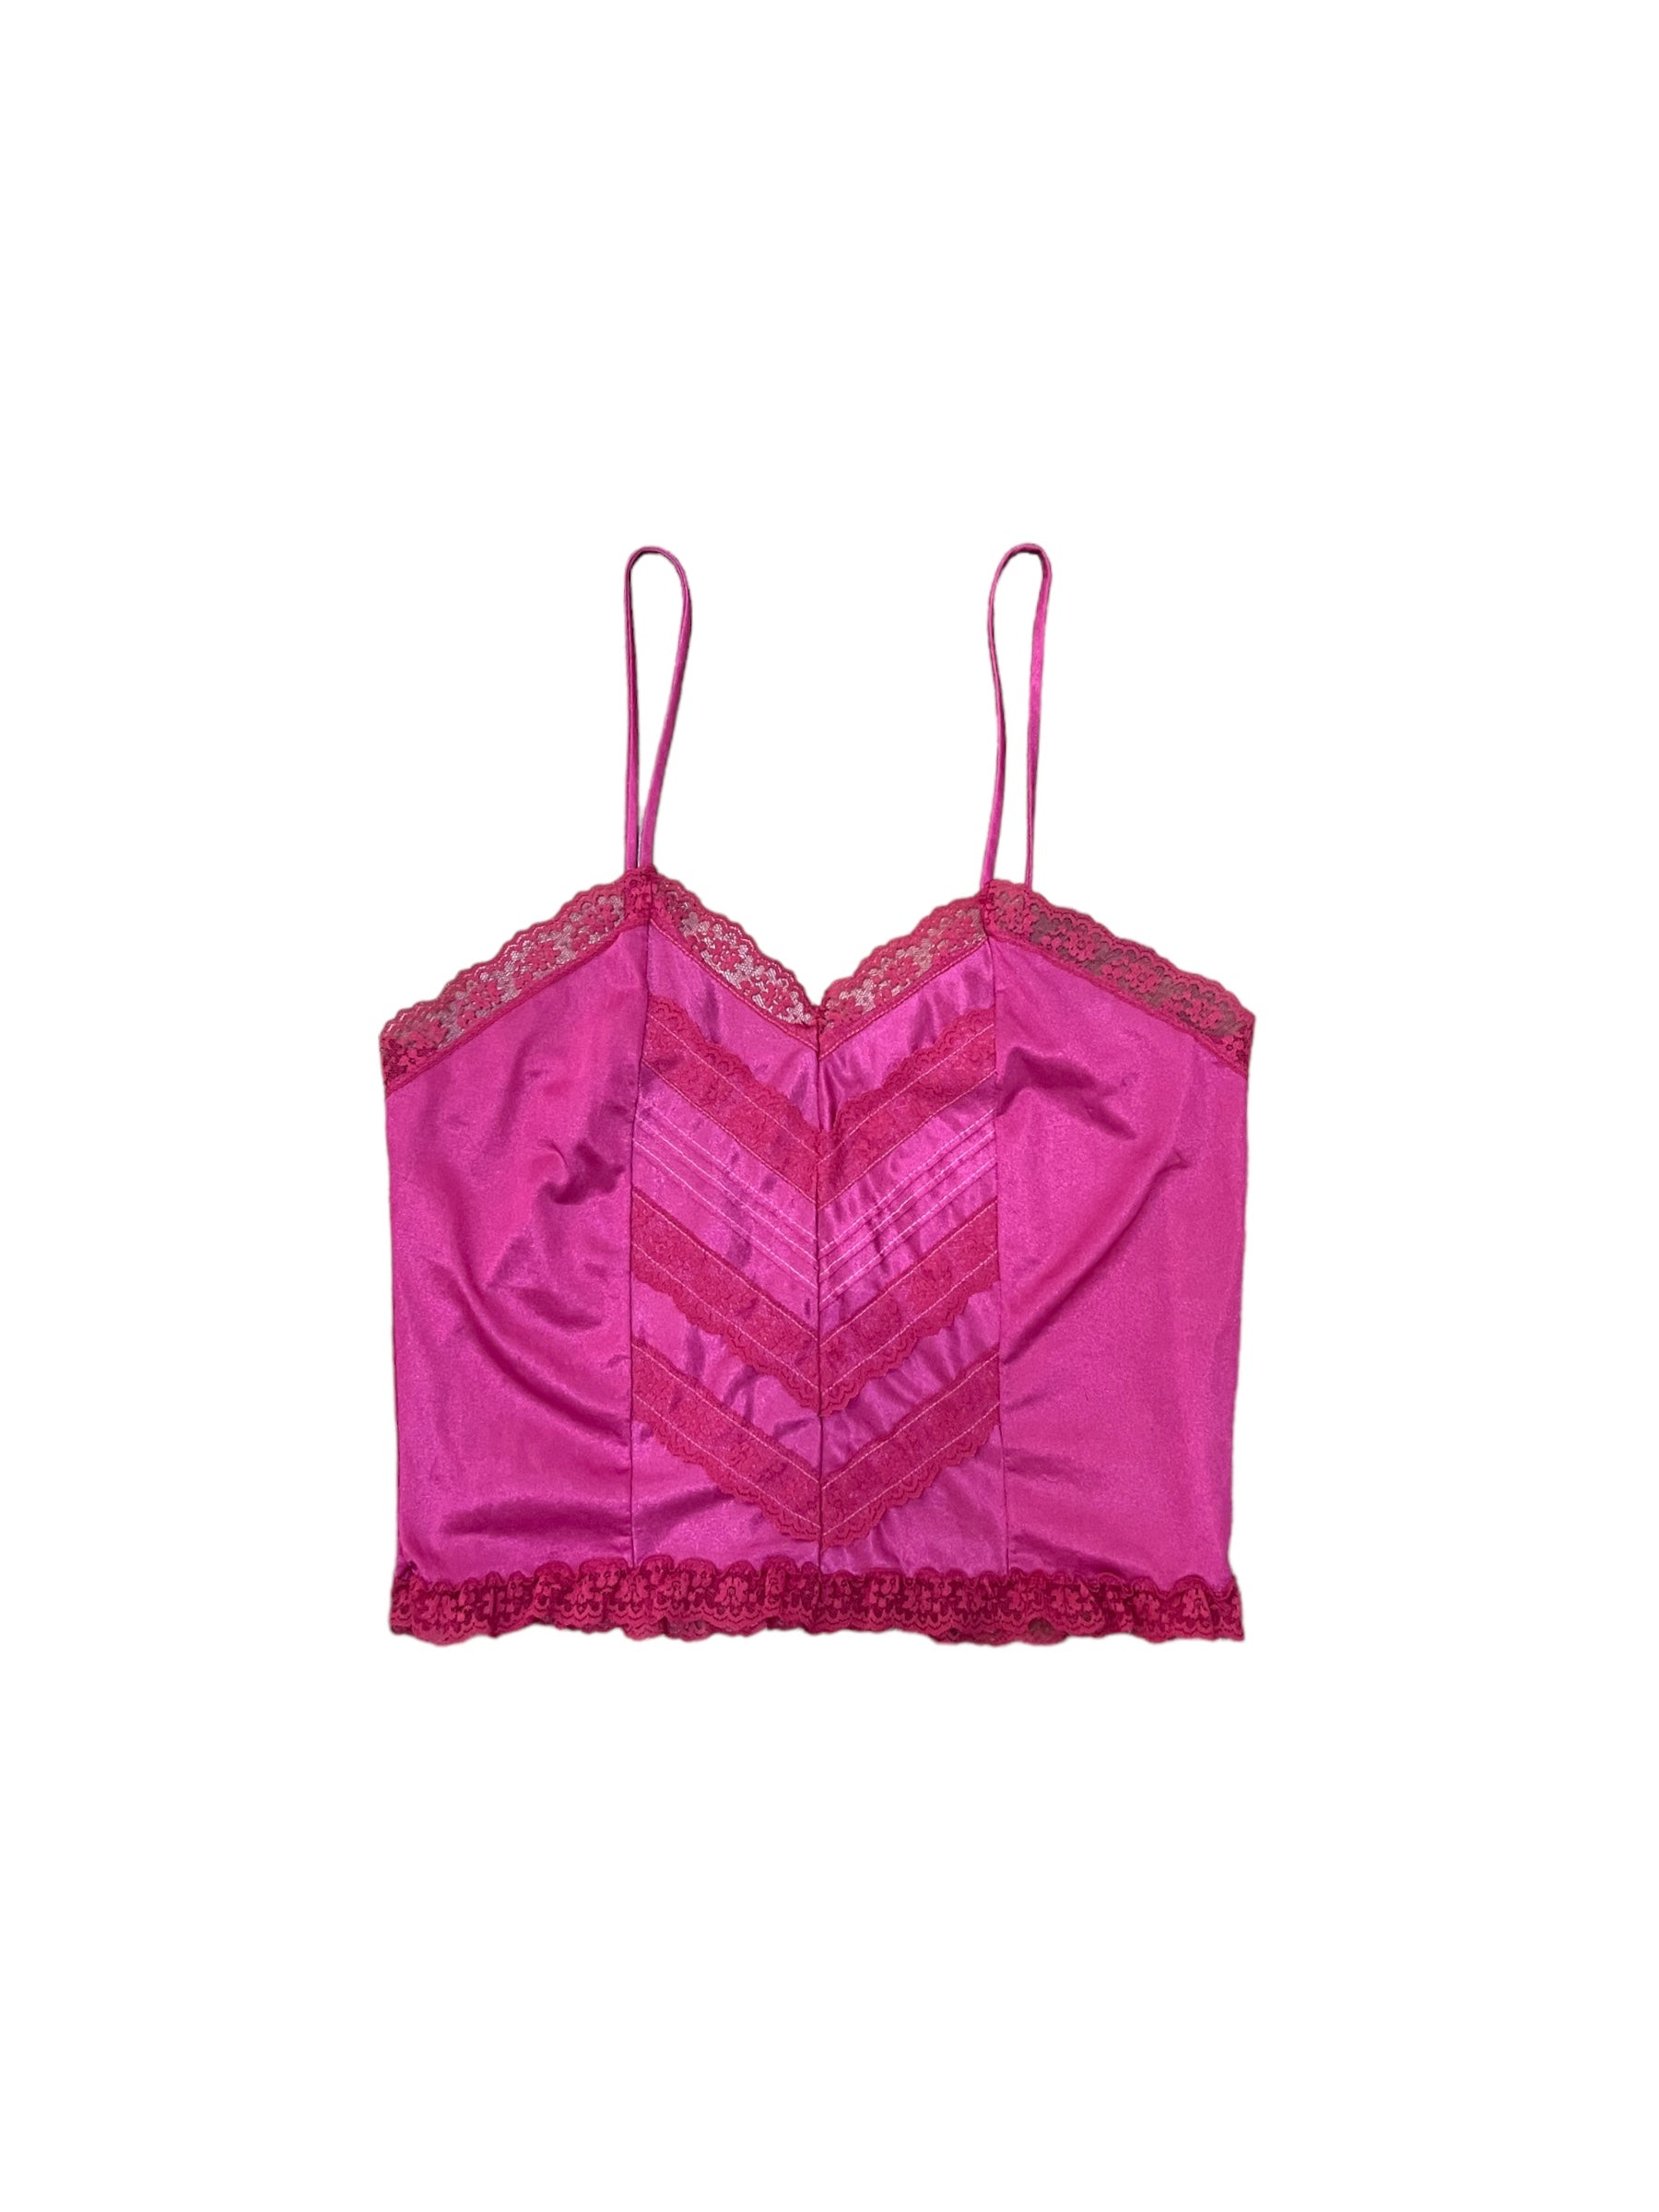 Hot Pink Lace Cami